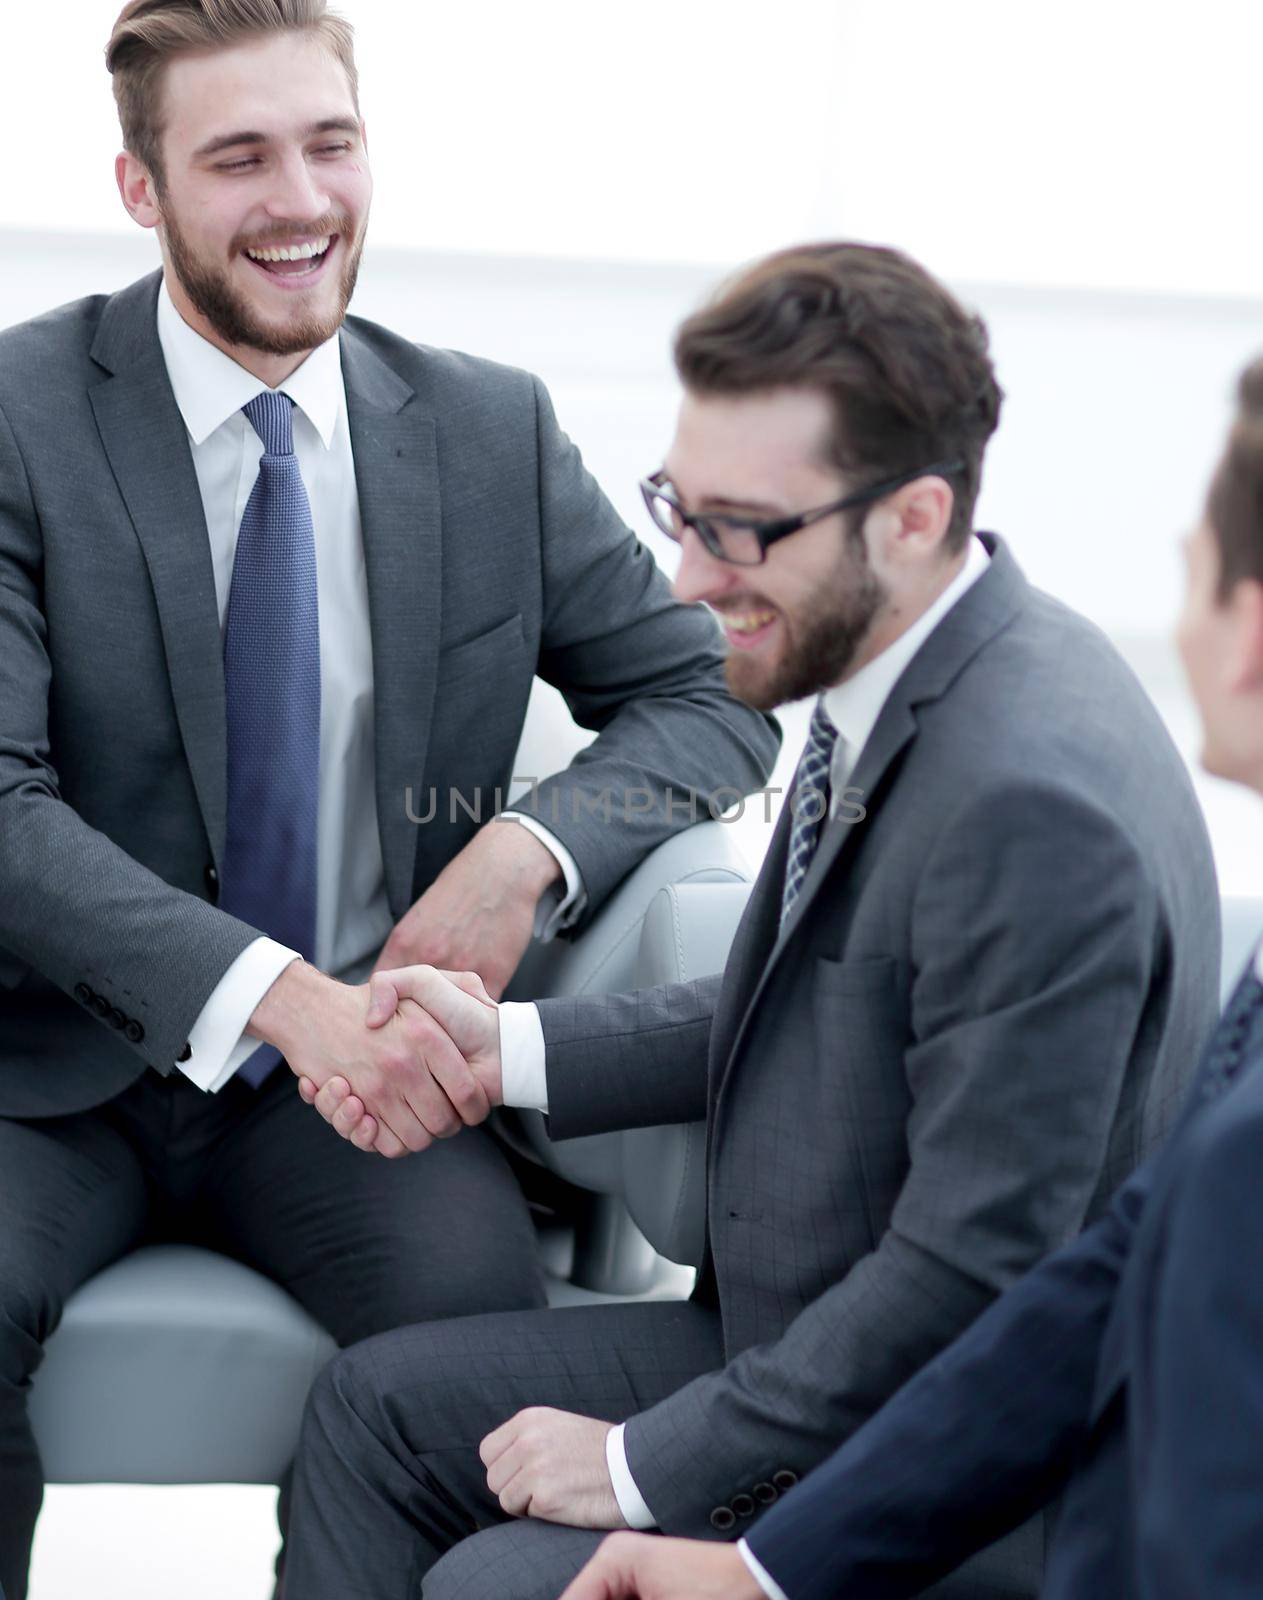 handshake business people in the office.photo with copy space